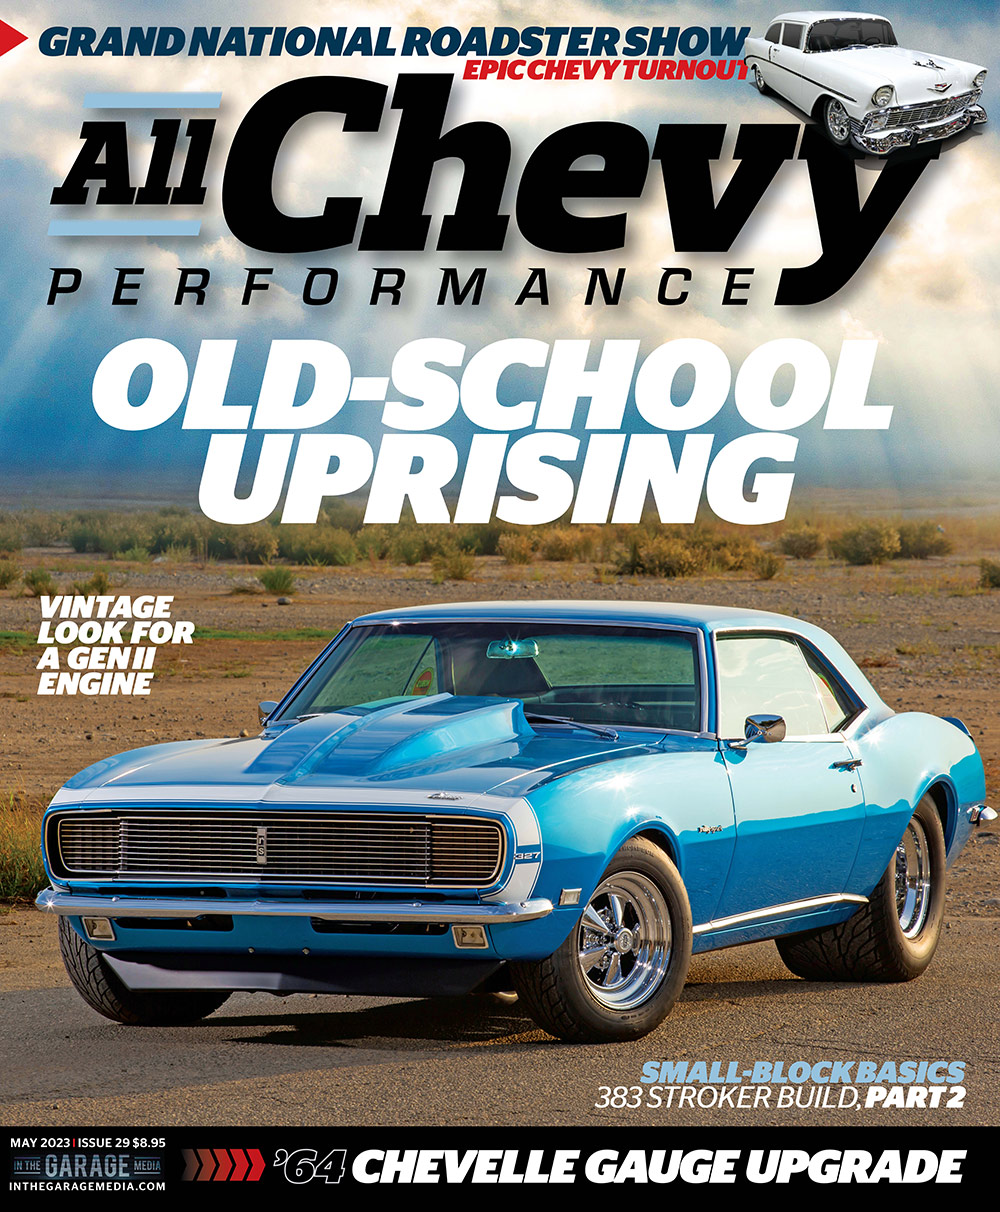 All Chevy Performance May 2023 cover